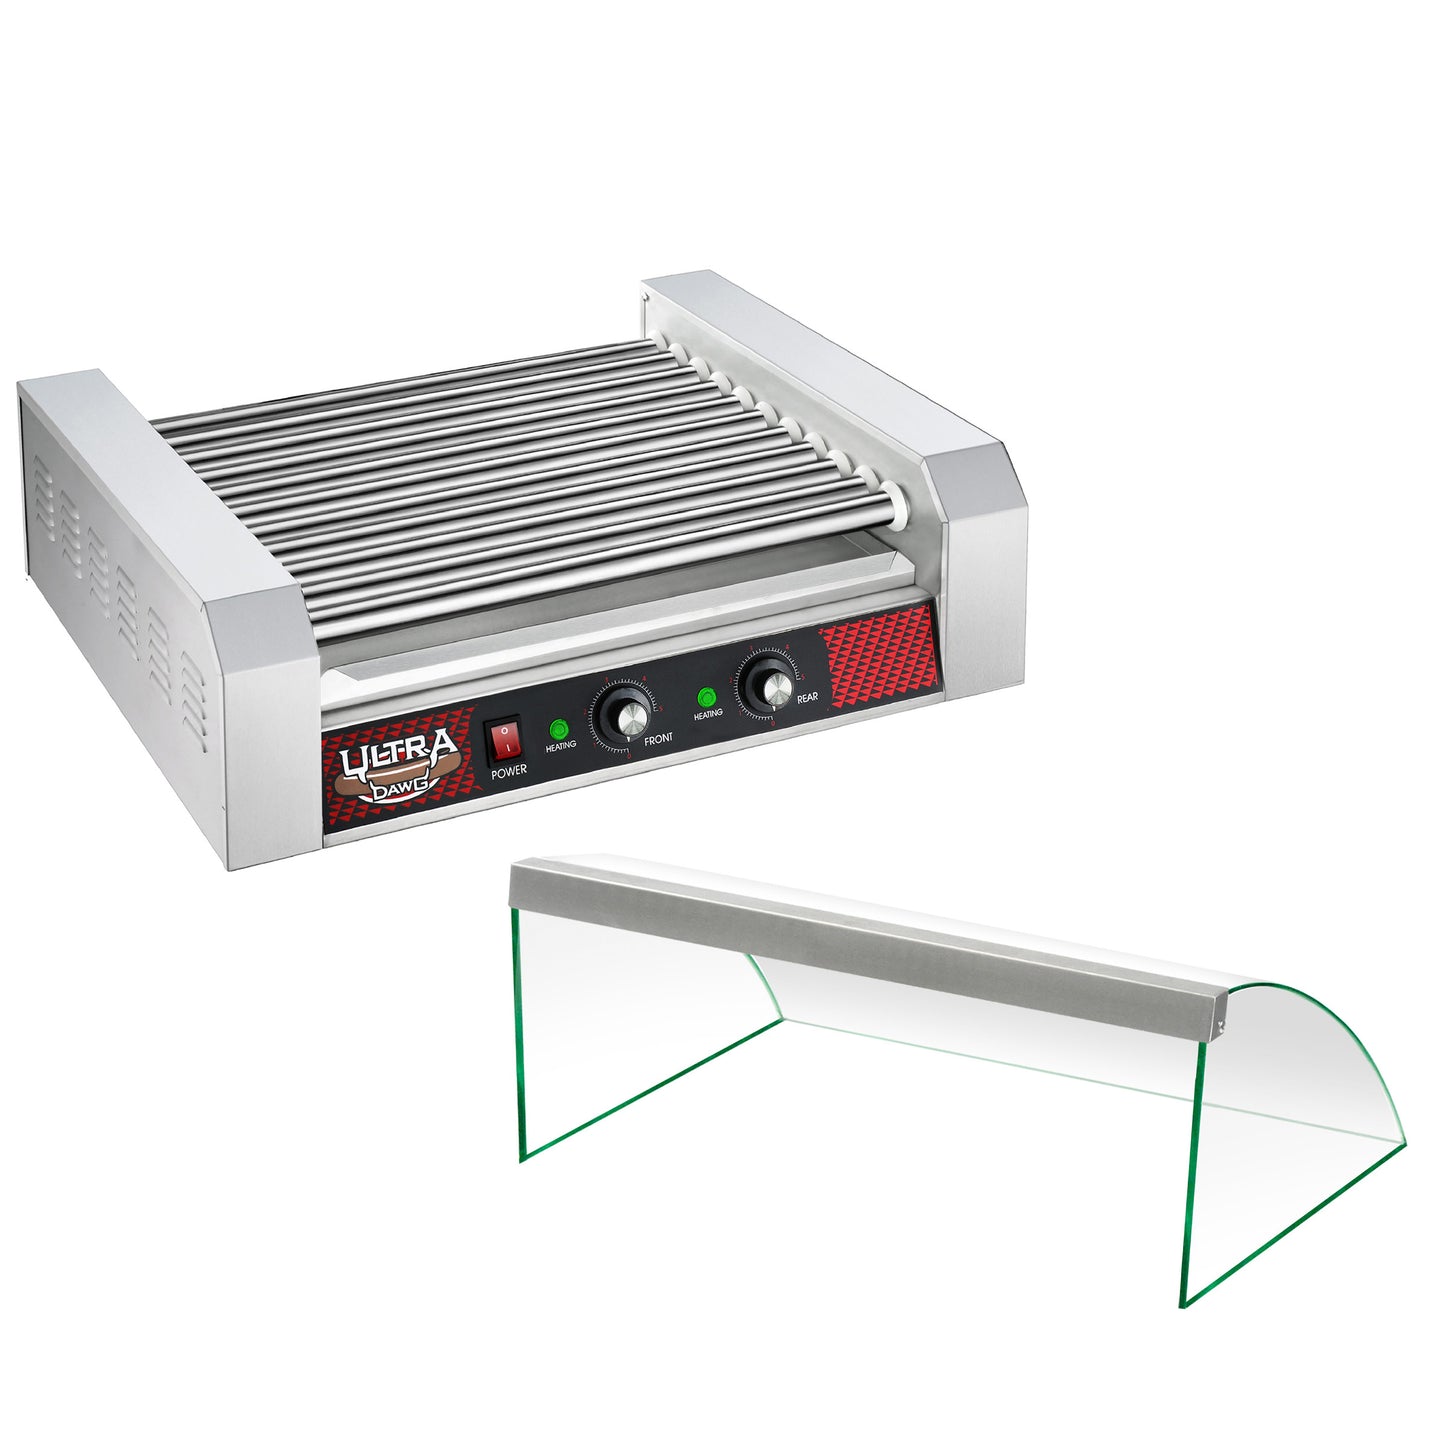 30 Hot Dog 11 Roller Hot Dog Machine with Tempered Glass Cover